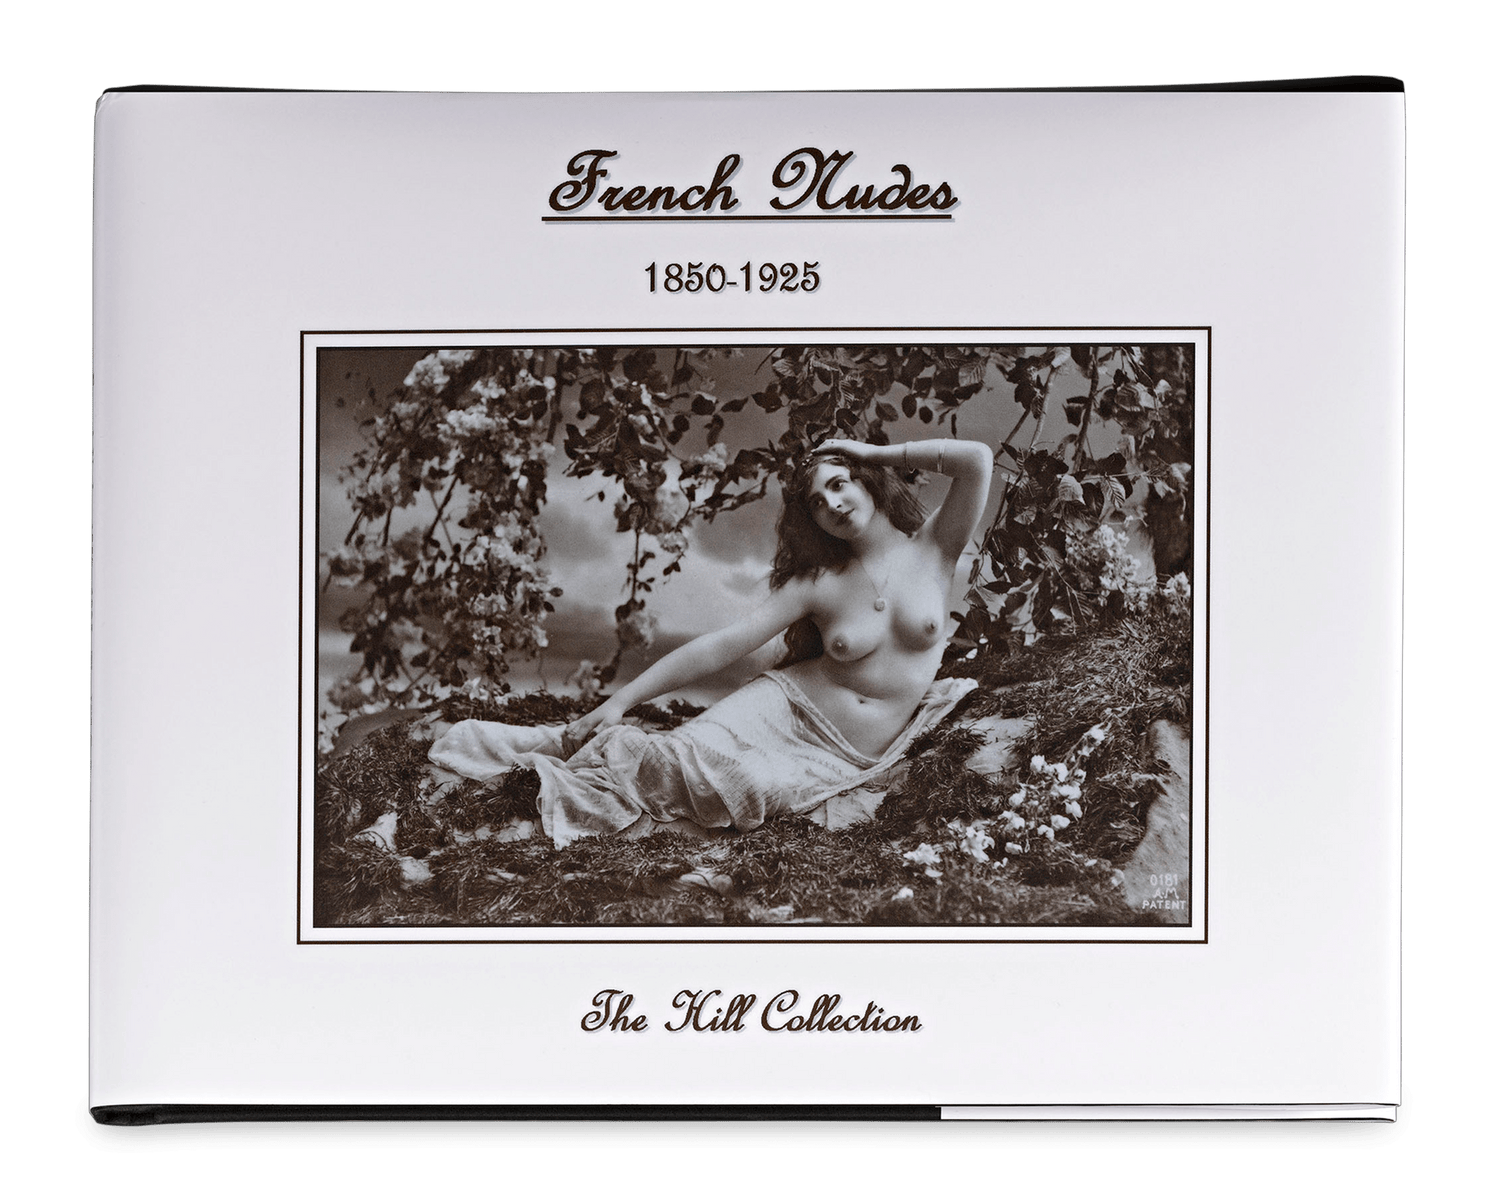 A limited edition book written about the collection, French Nudes: 1850-1925, is included